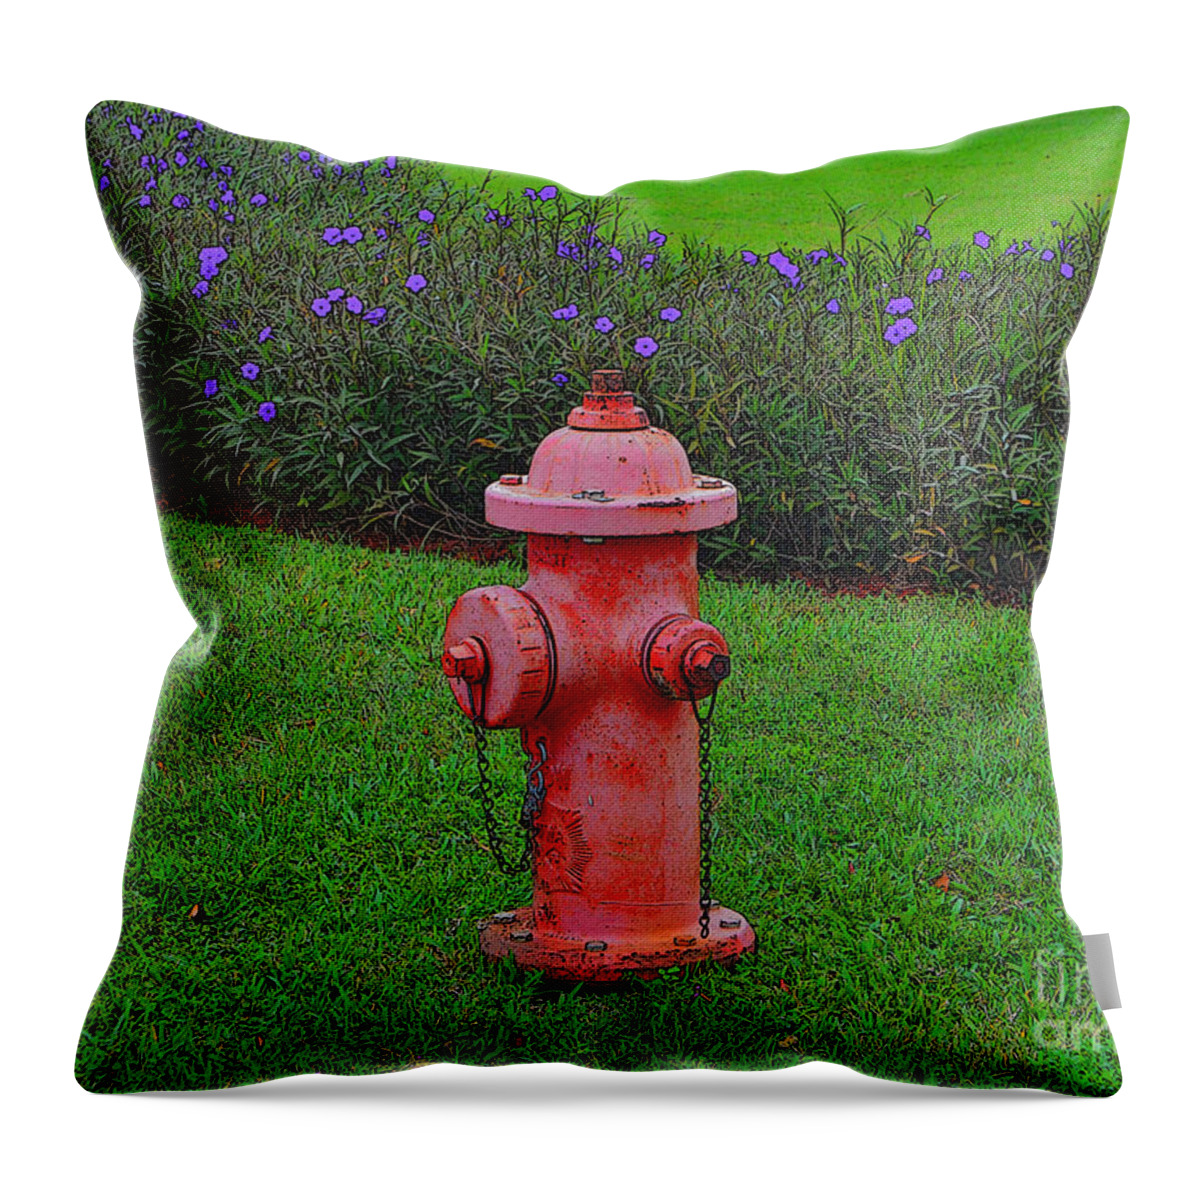 Fire Hydrant Throw Pillow featuring the photograph 62- Puppy Garden by Joseph Keane